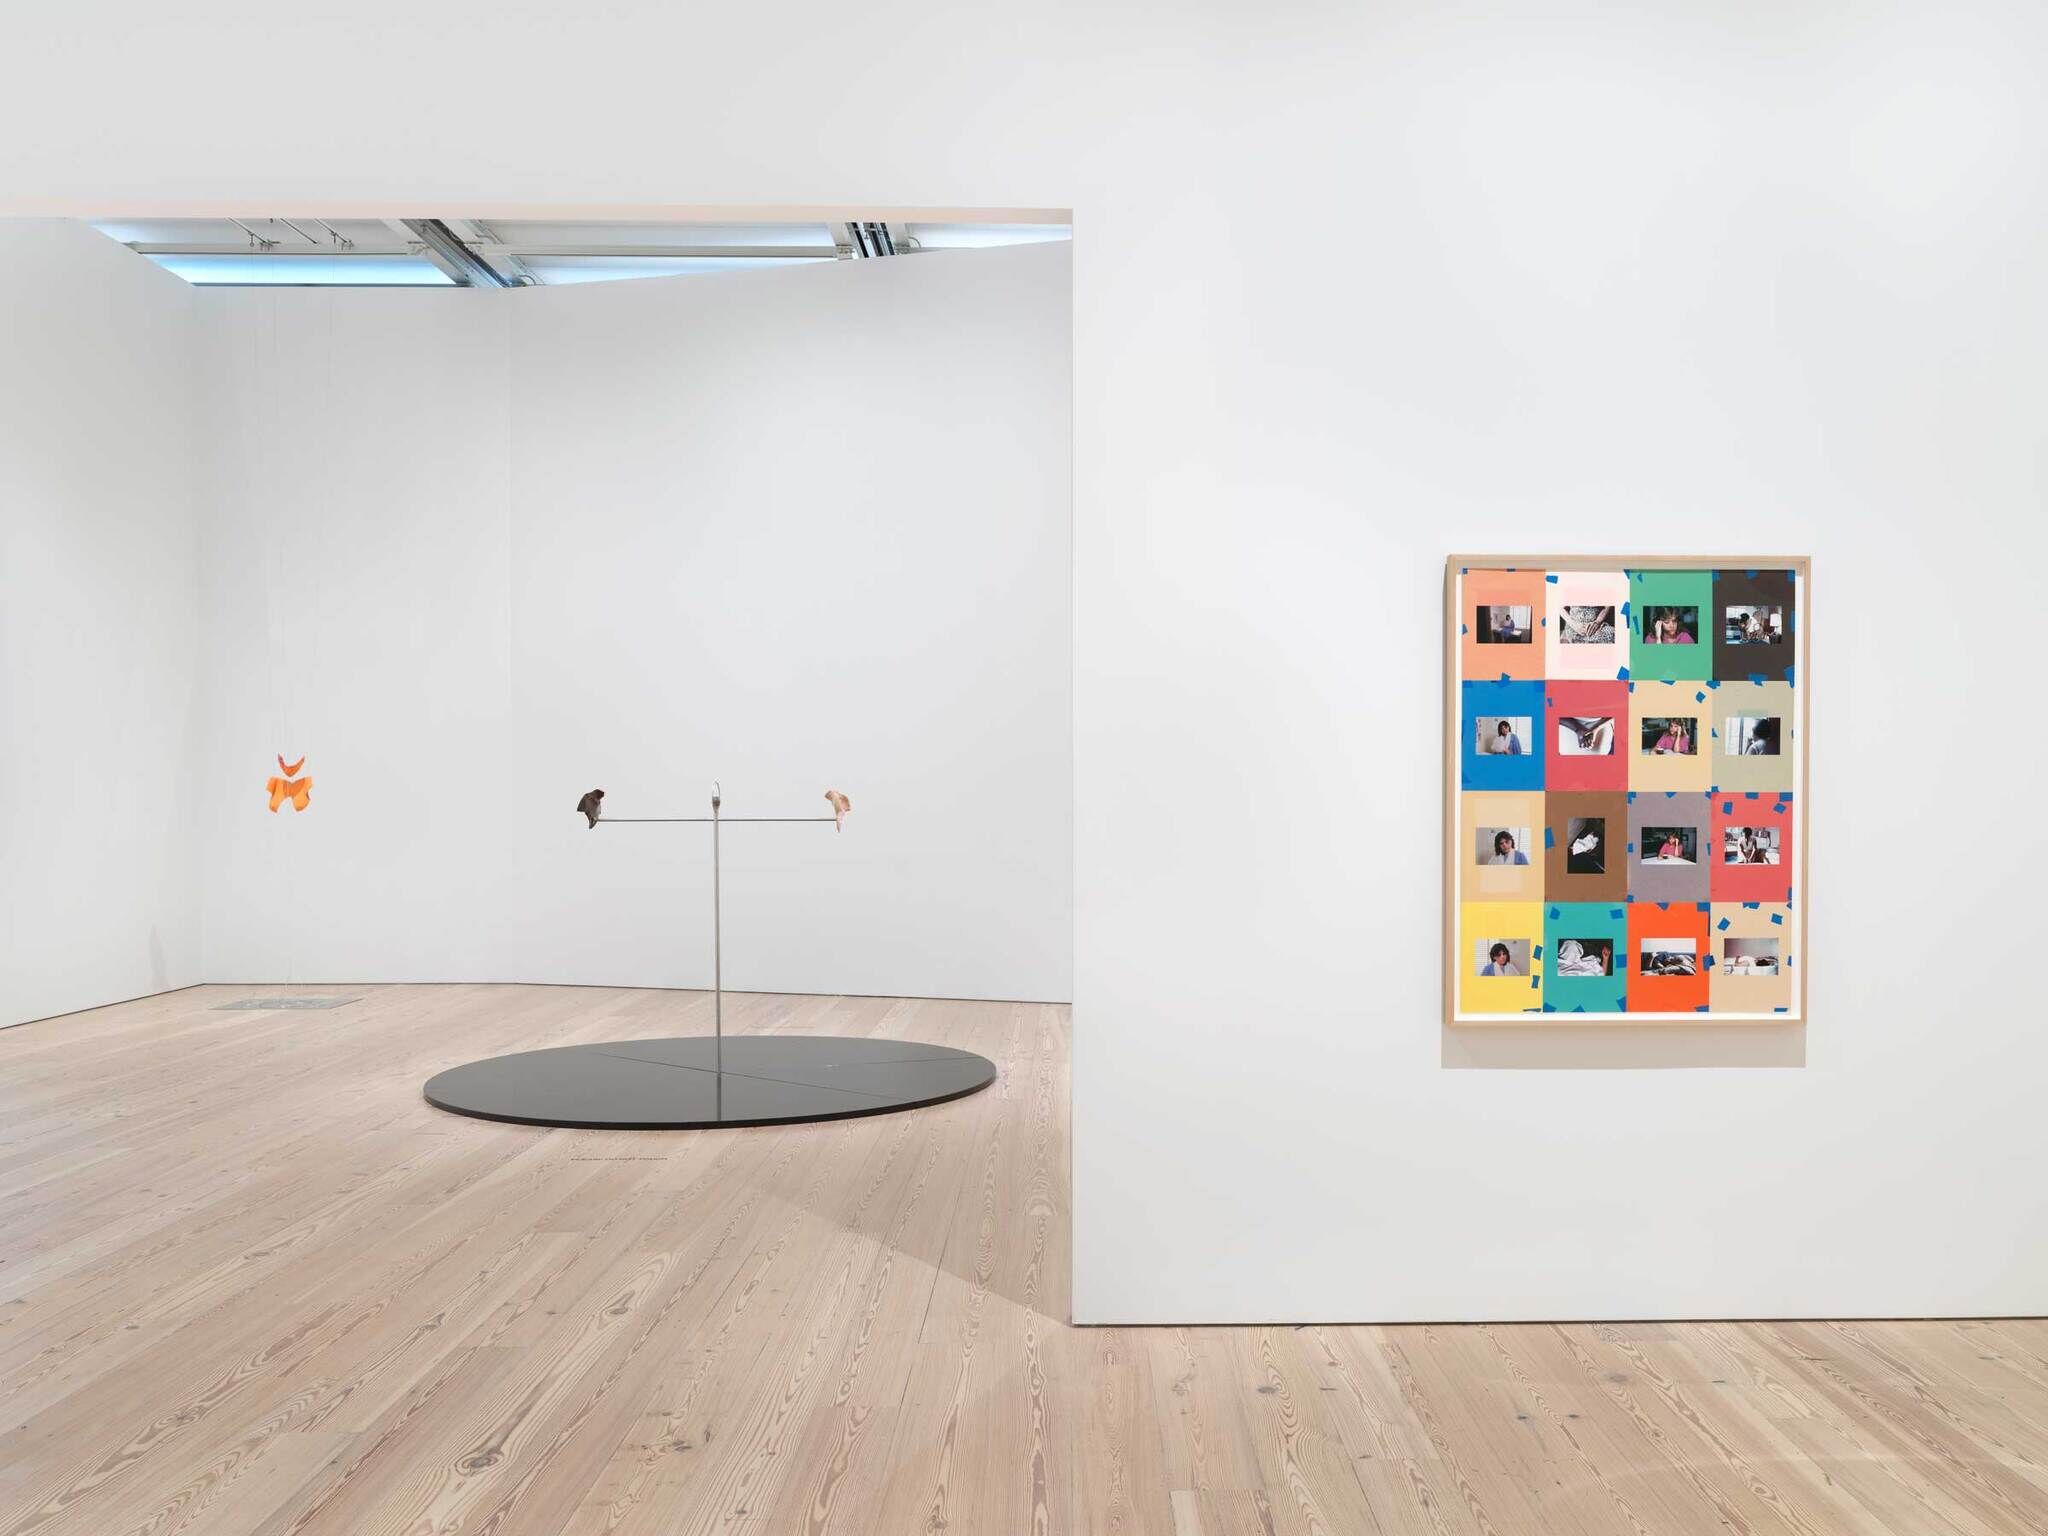 Minimalist art gallery interior with a circular sculpture, two wall-mounted pieces, and a collage of images on the right.